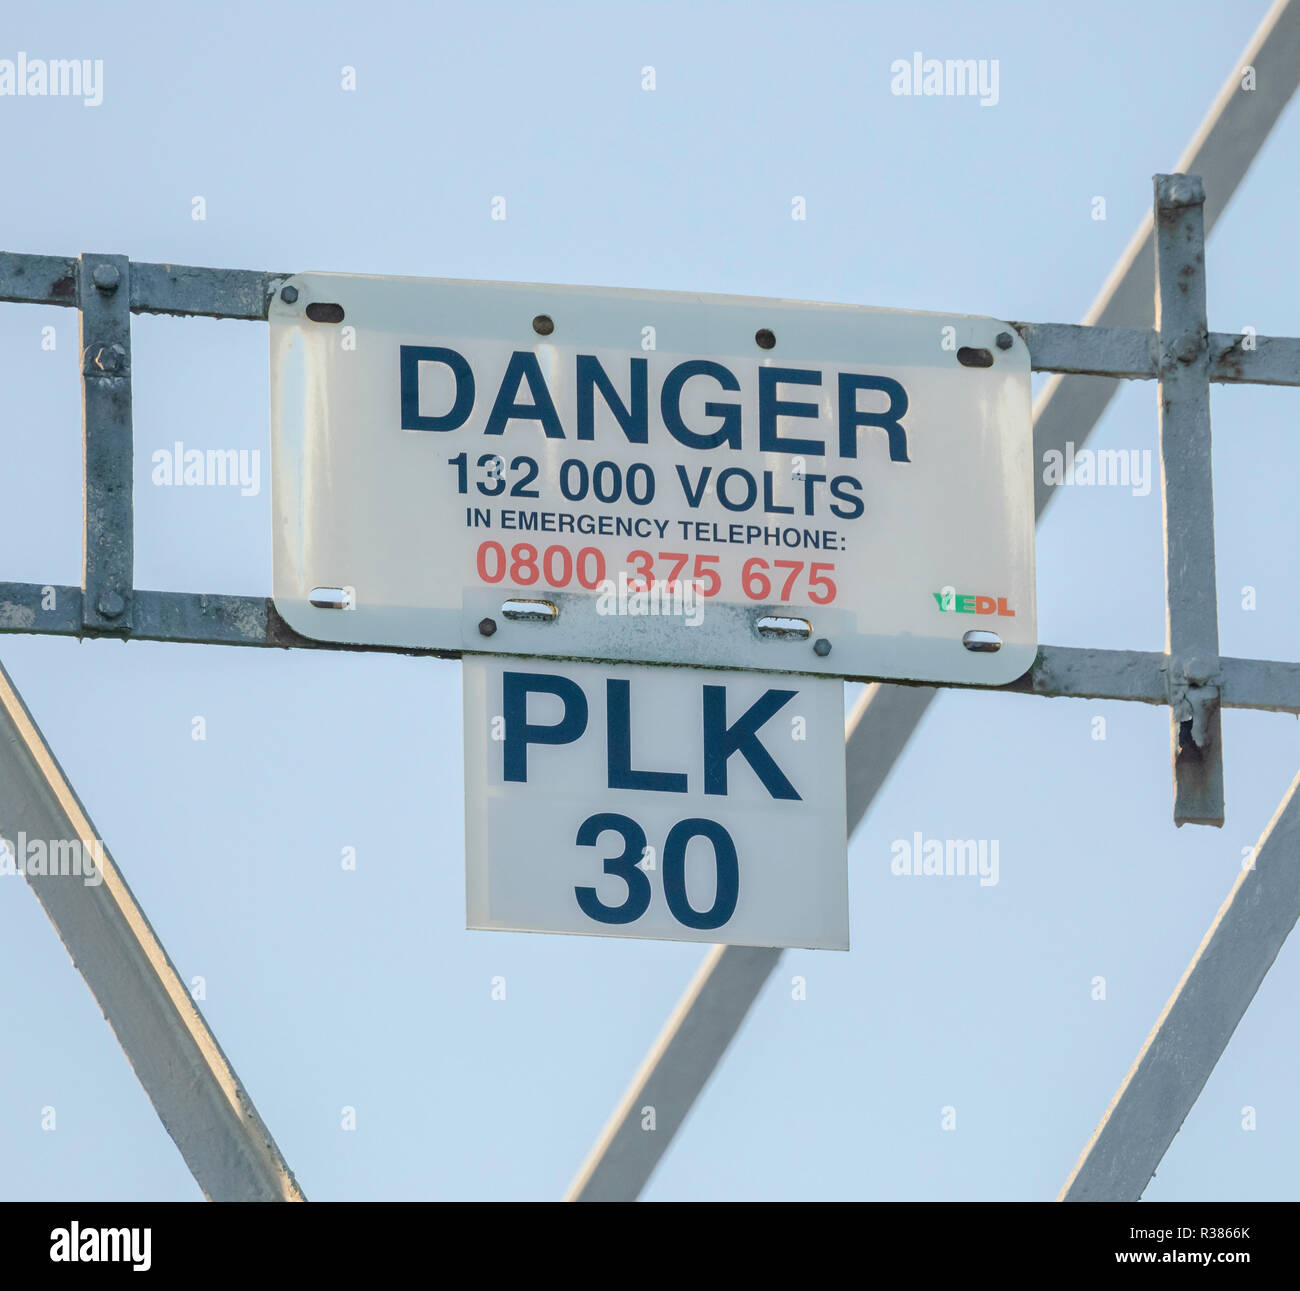 A warning sign on an electricity pylon Stock Photo